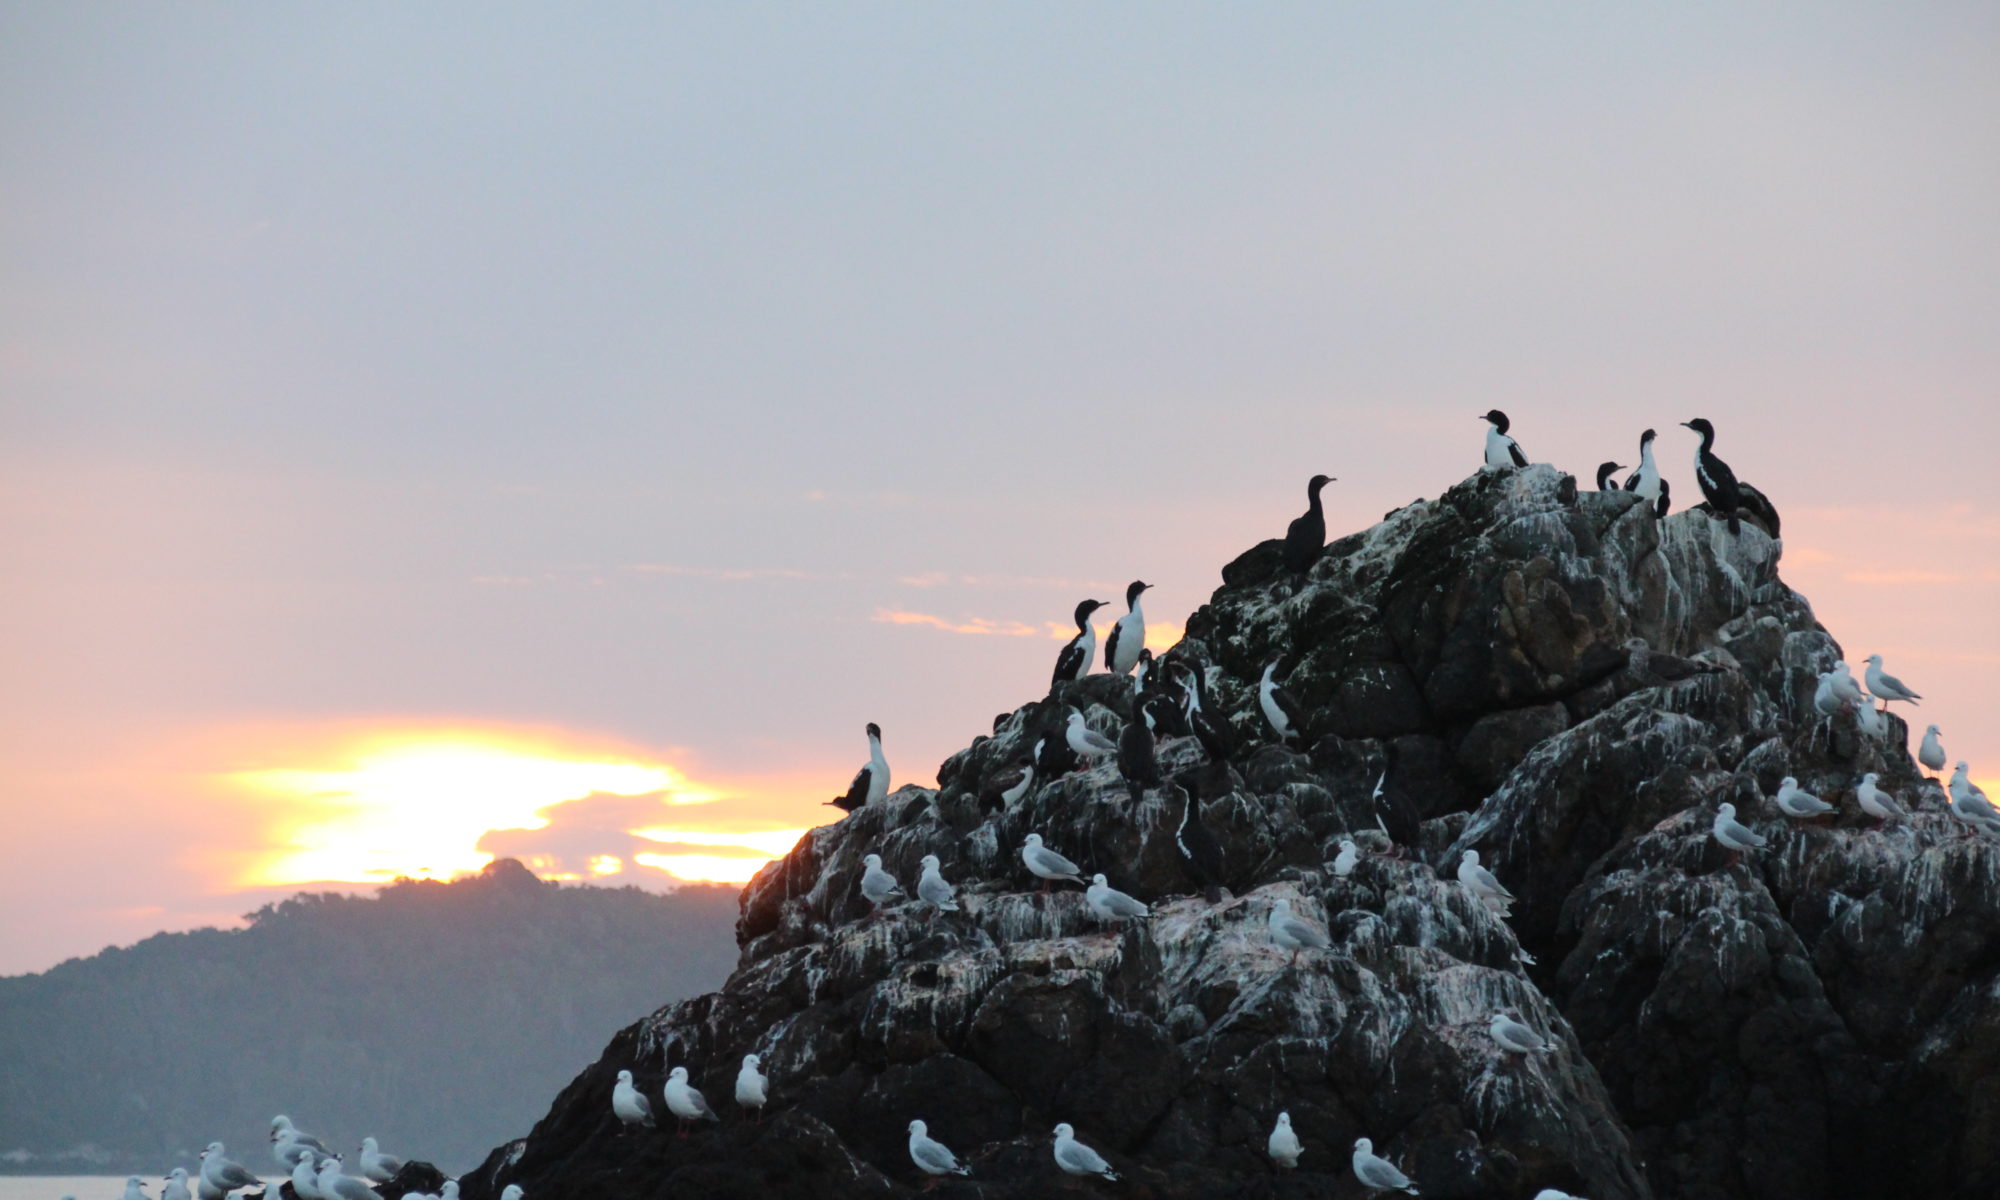 Cormorants roosting at sunset